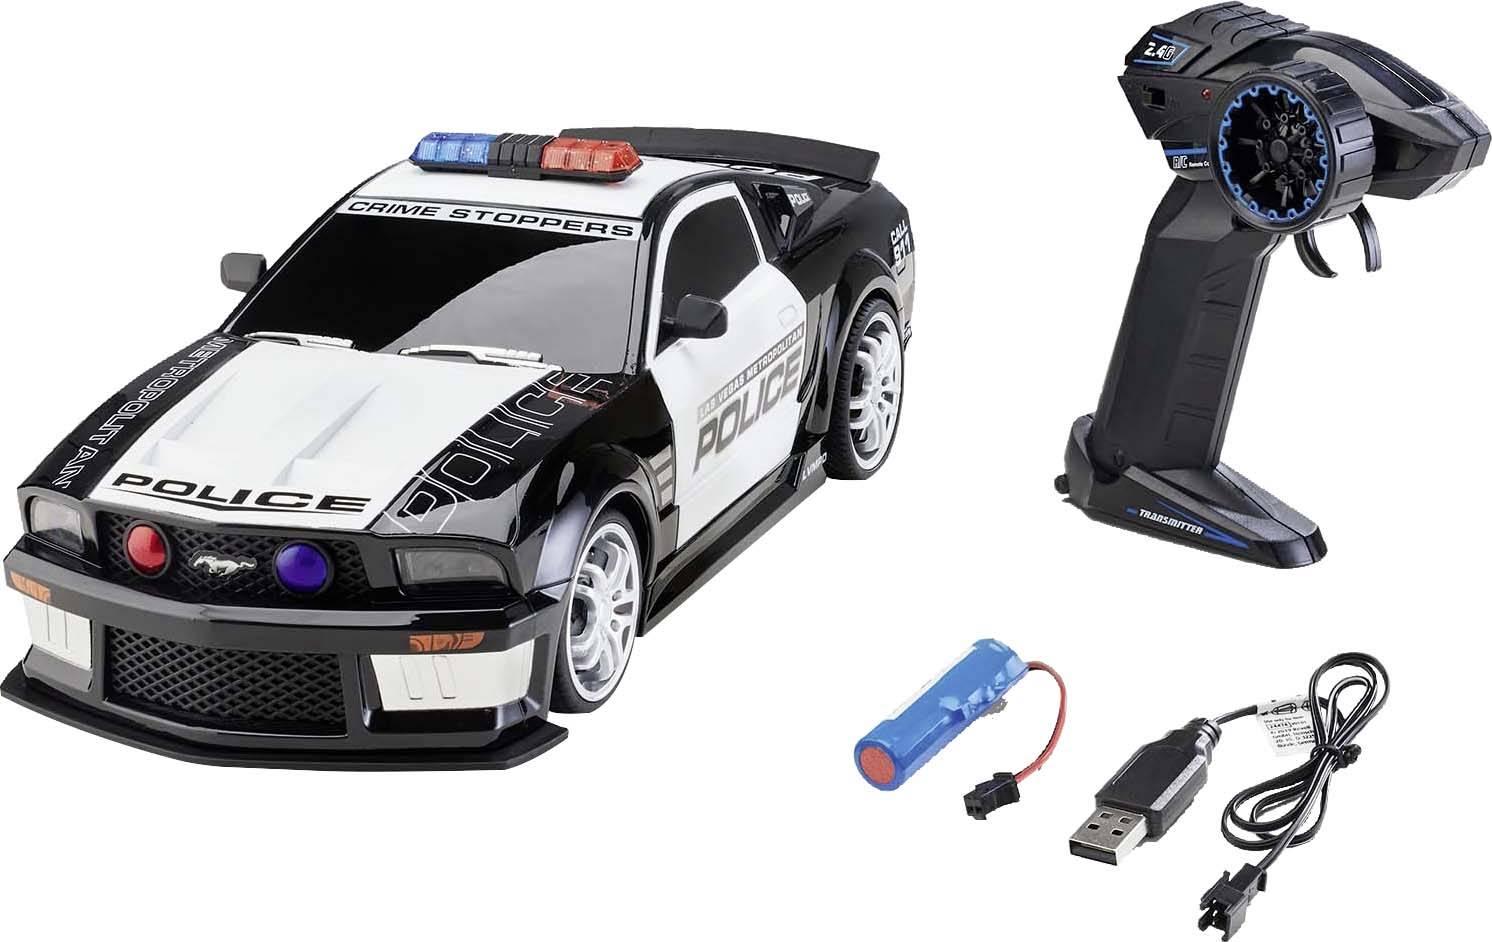 Rc Police Car: Exciting Features and Models of RC Police Cars